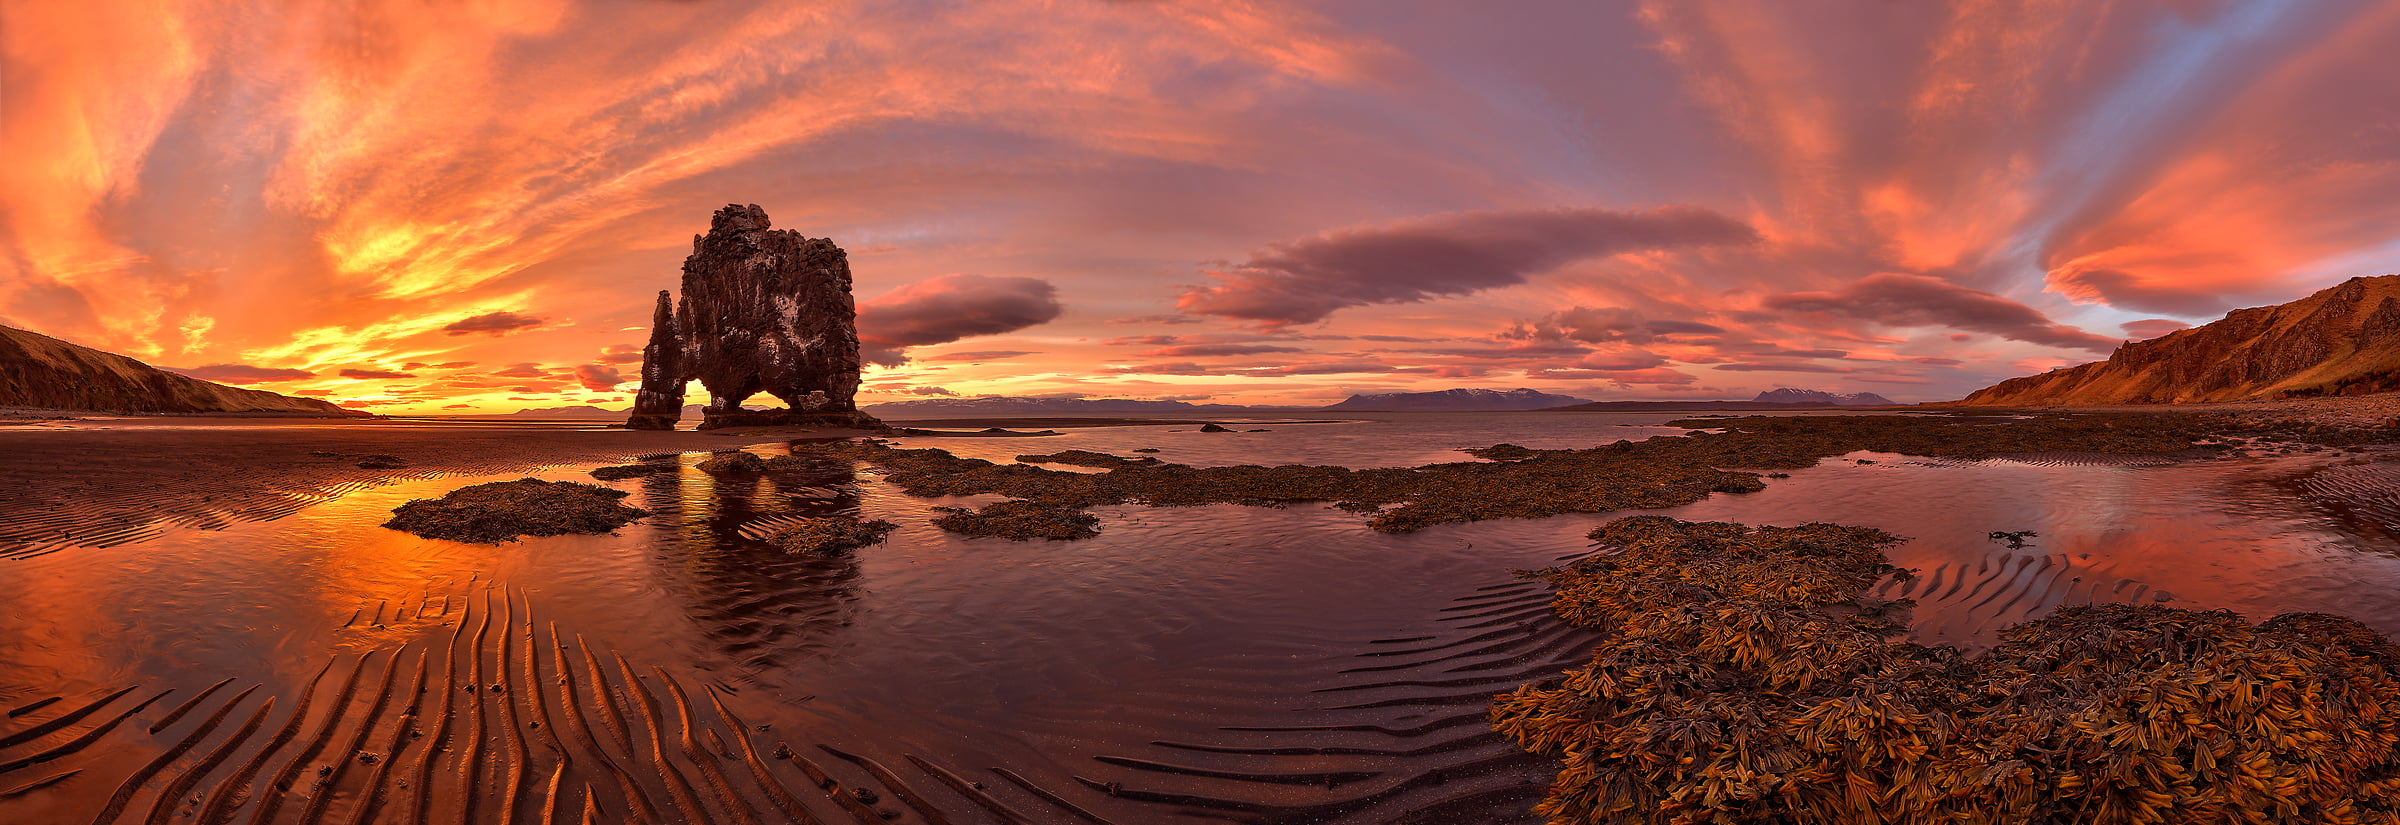 109 megapixels! A very high resolution, large-format VAST photo of sunset and sunrise on the water with a giant rock structure called Hvítserkur Monolith or Dinosaur Rock; fine art landscape photo created by Scott Dimond in the Northwestern Region of Iceland